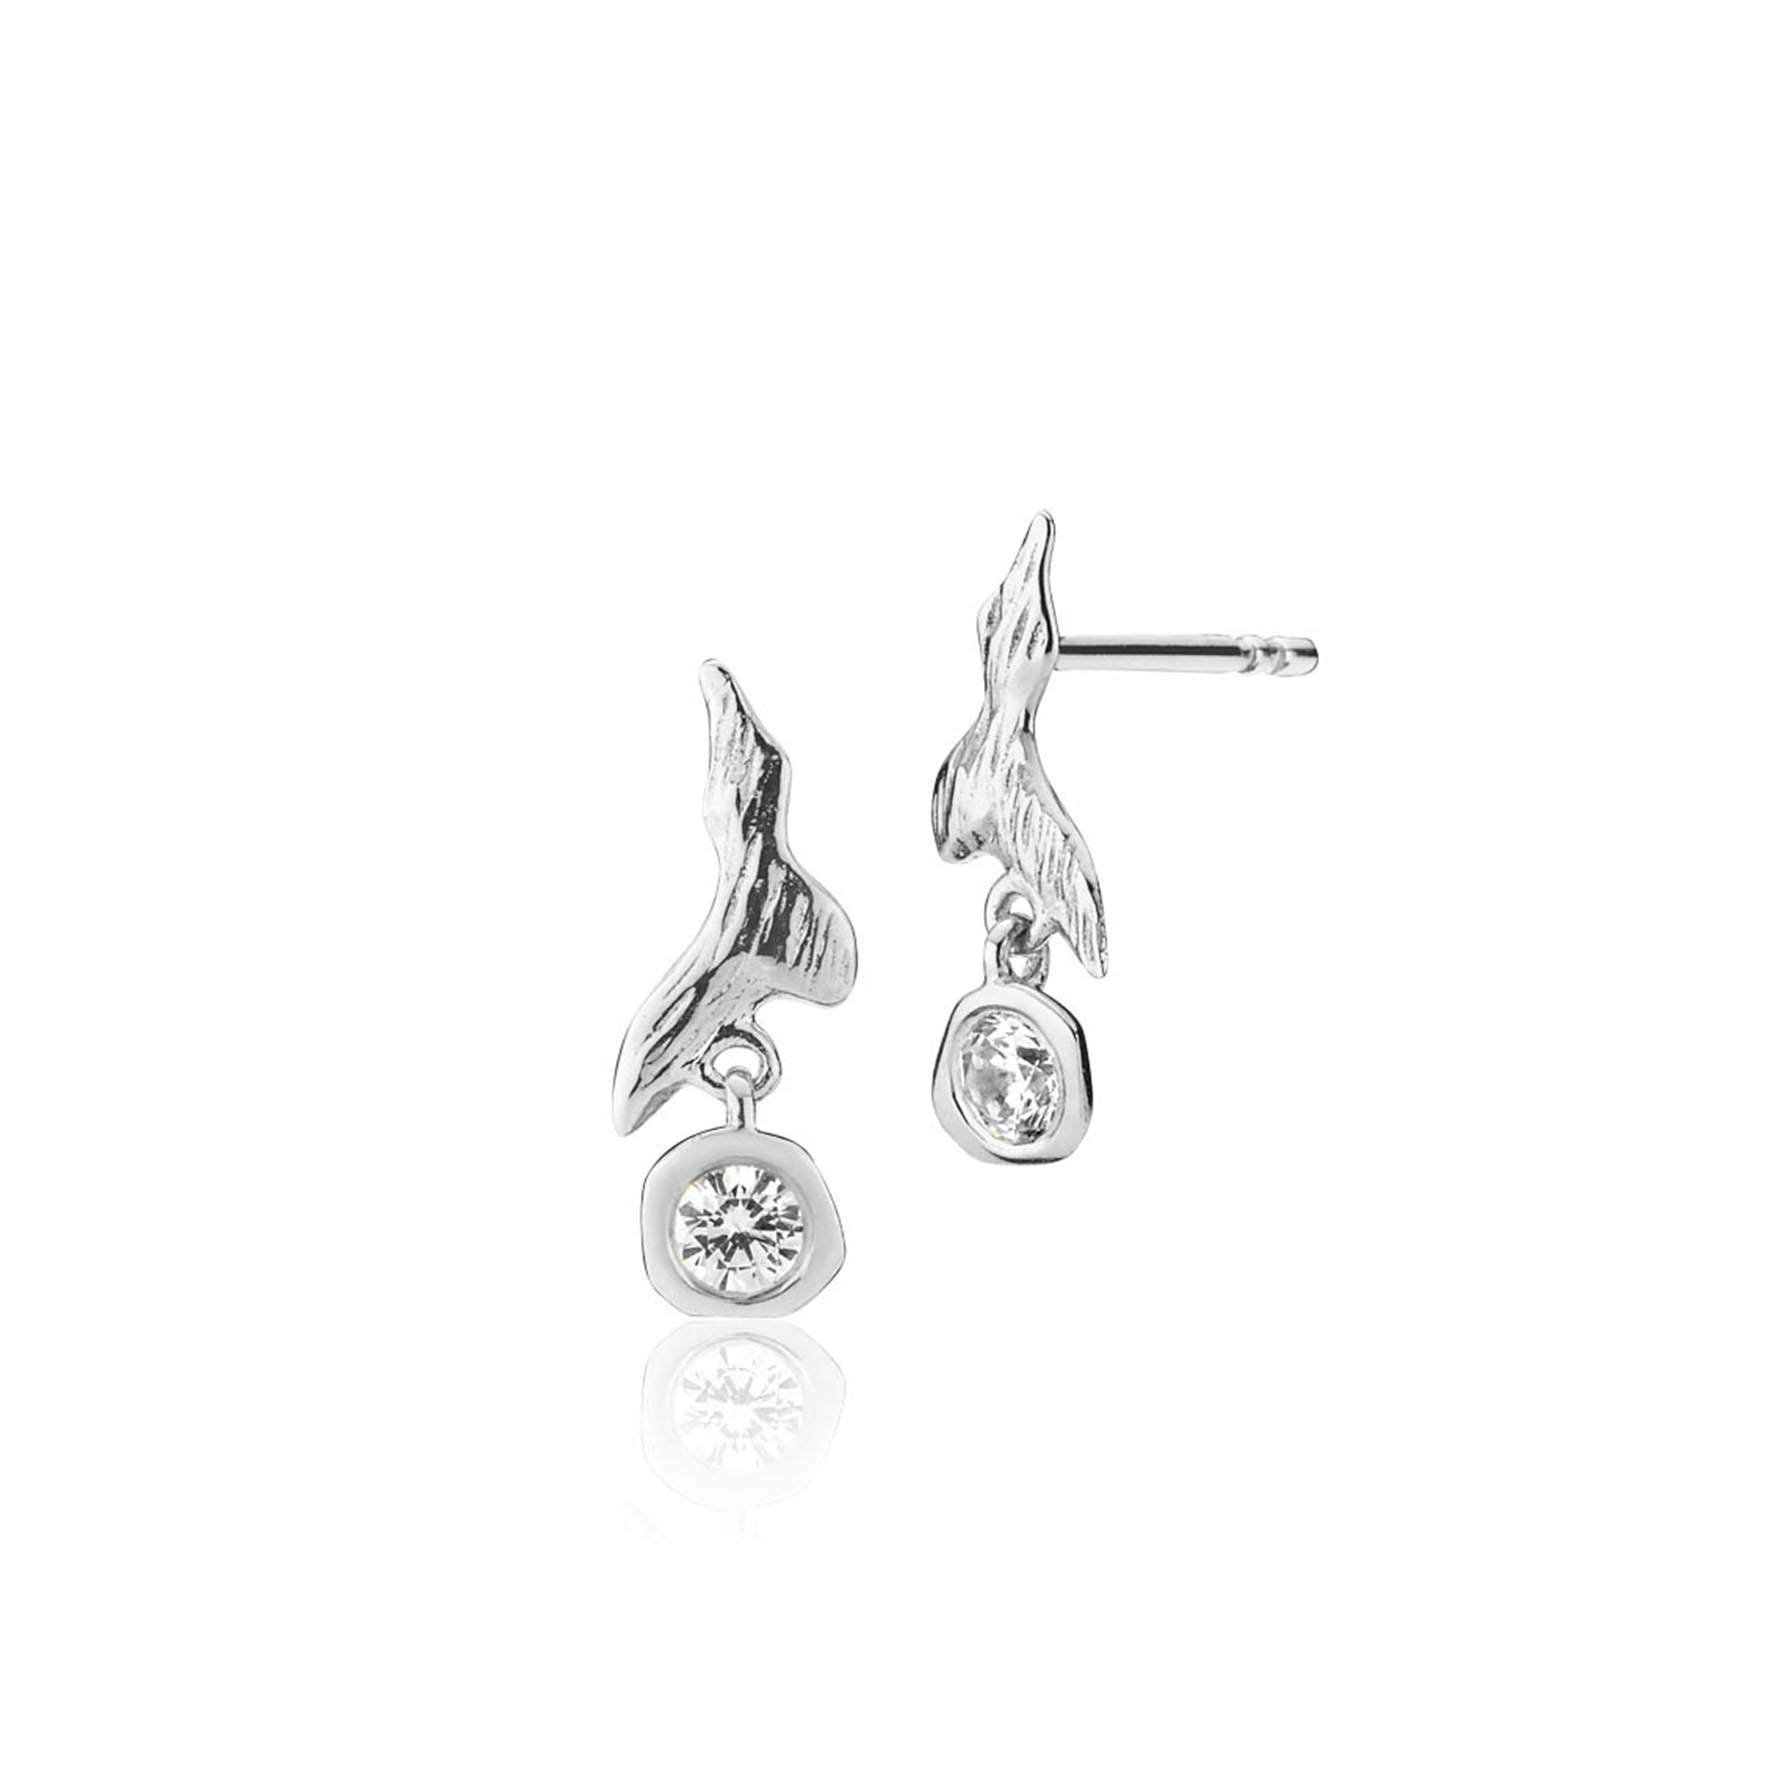 Fairy Earrings With Stone von Izabel Camille in Silber Sterling 925|